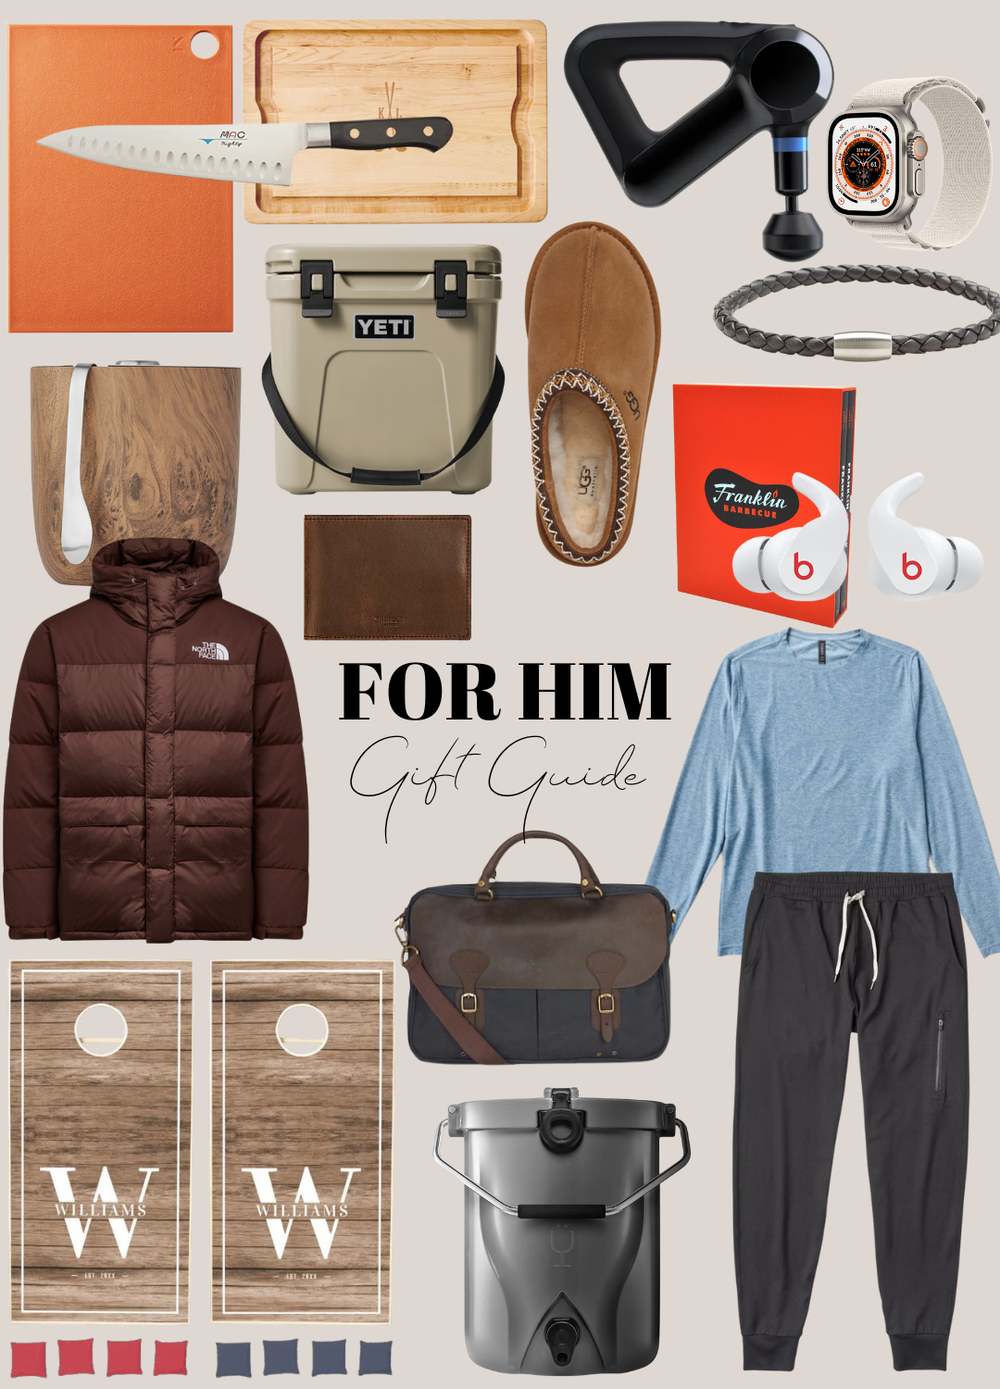 The Best Gift Ideas for Him - 2022 Holiday Gift Guide - Blogger